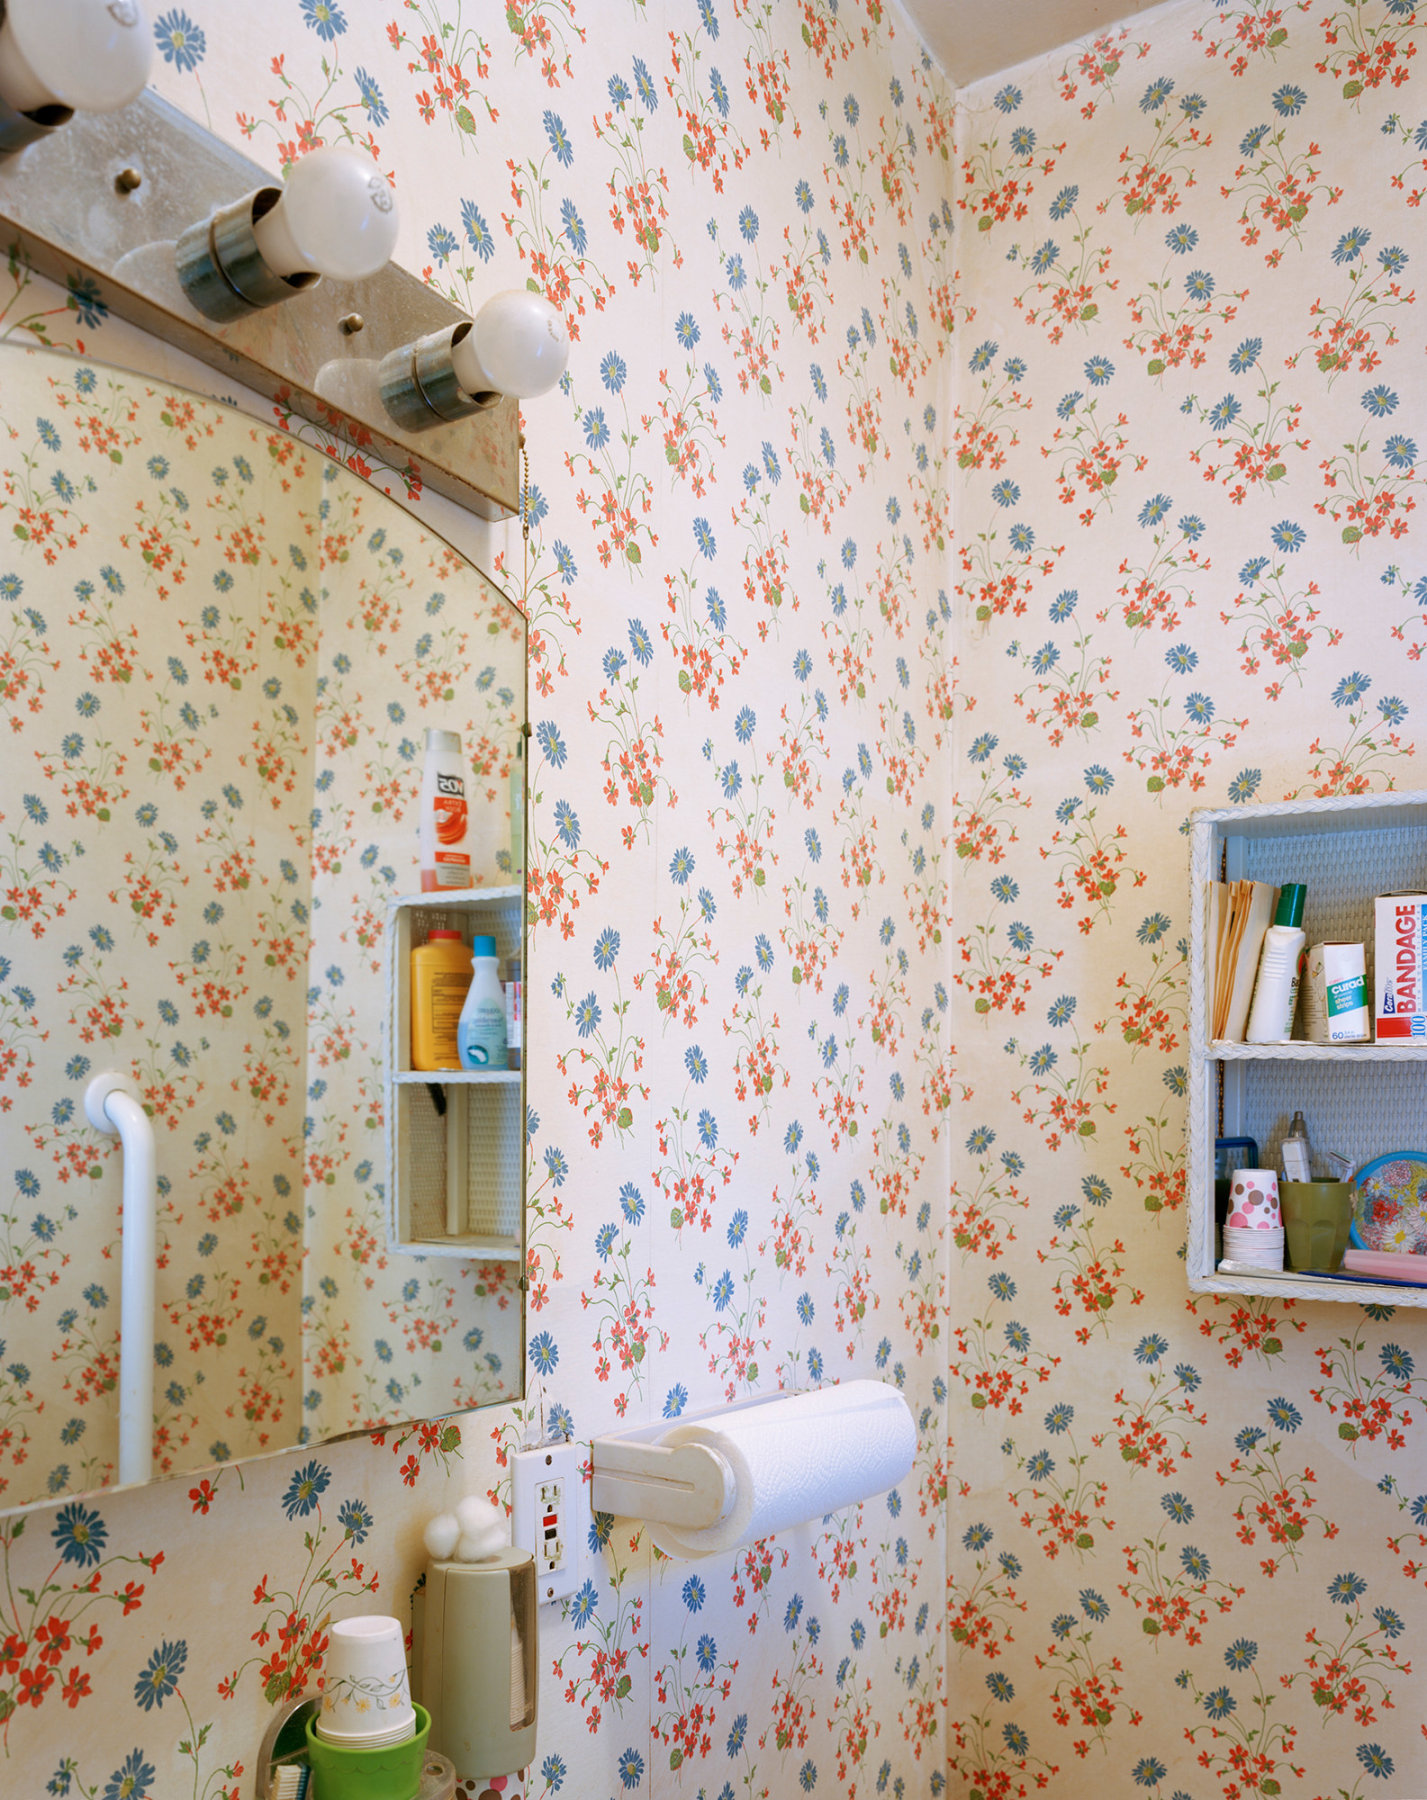 Photograph of bathroom interior with patterned wallpaper, by Jade Doskow